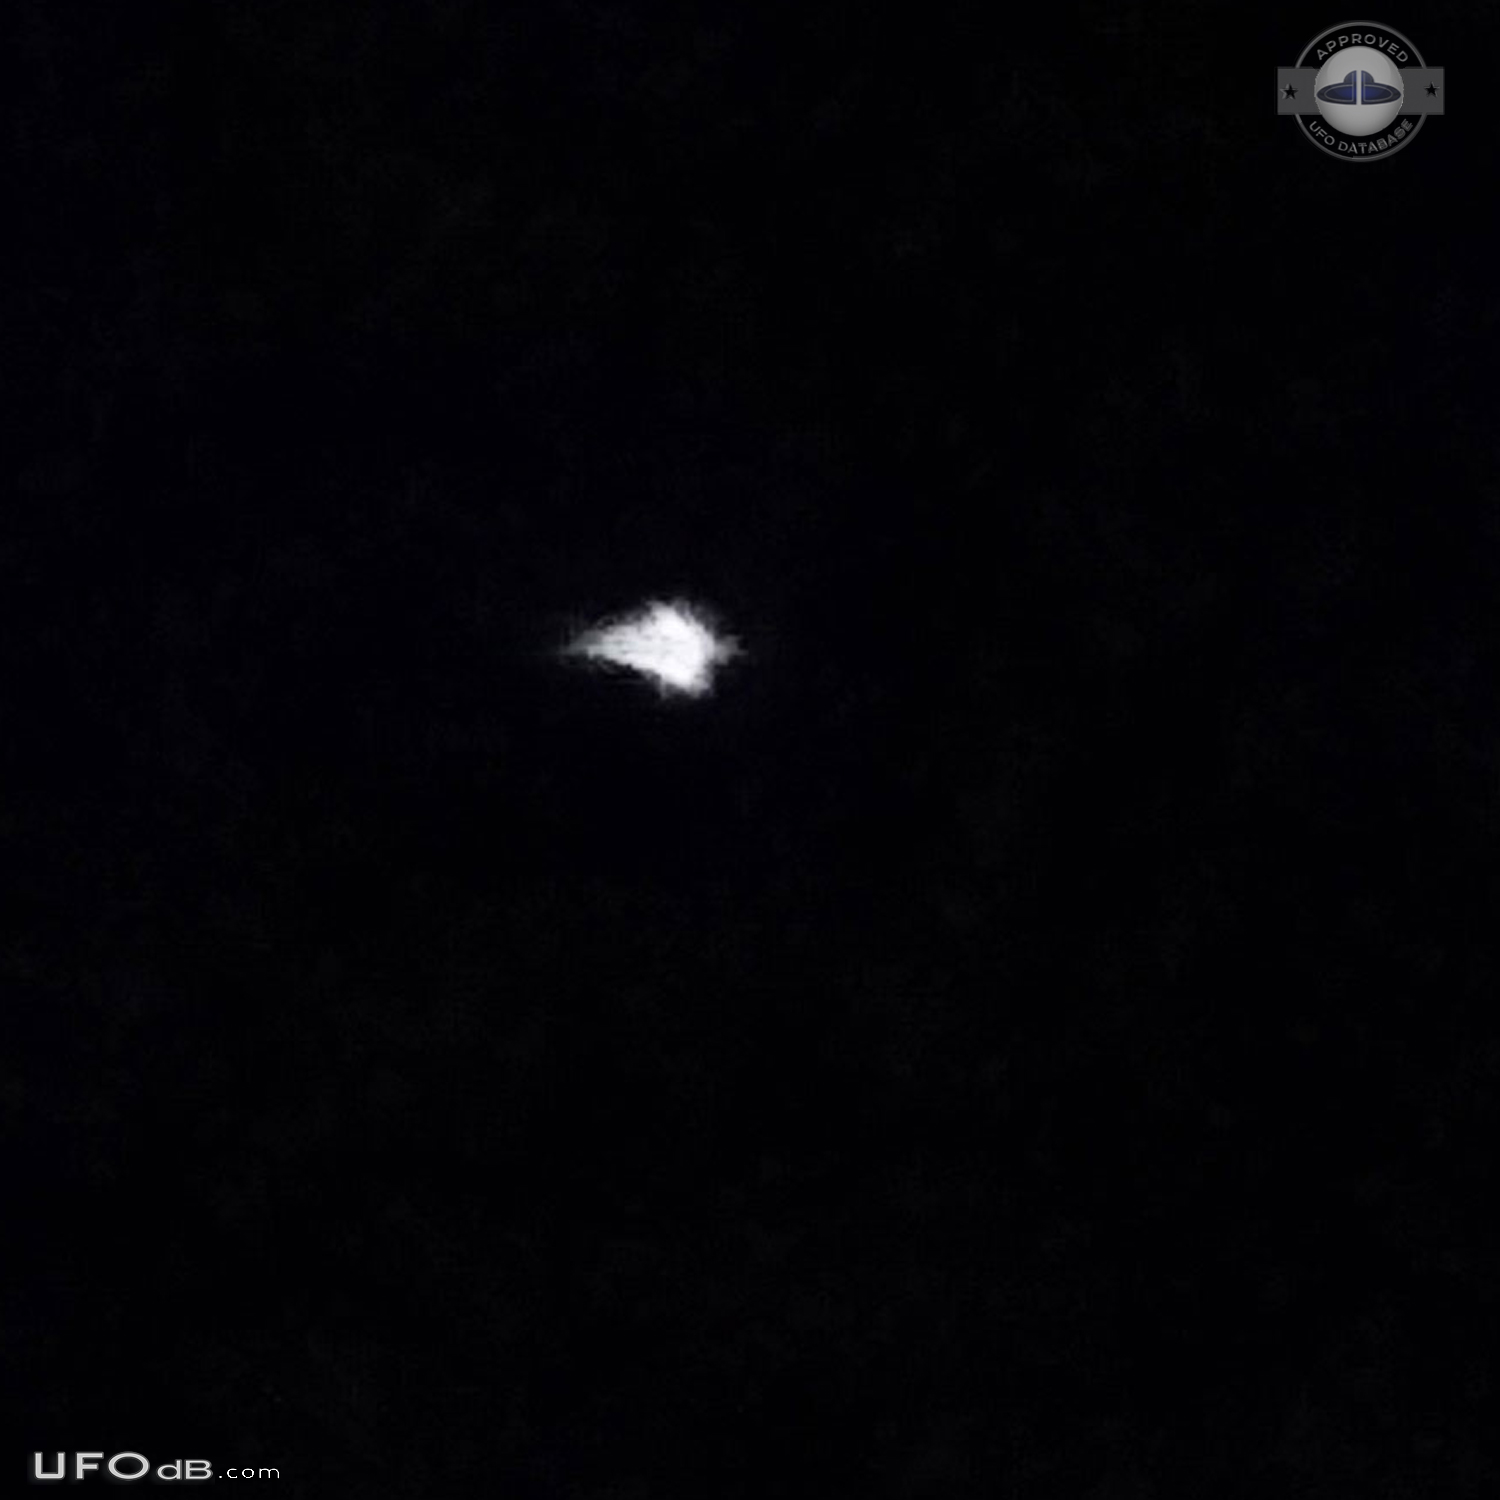 Seen from distance unmoving much larger other stars - Gatineau Quebec  UFO Picture #767-4